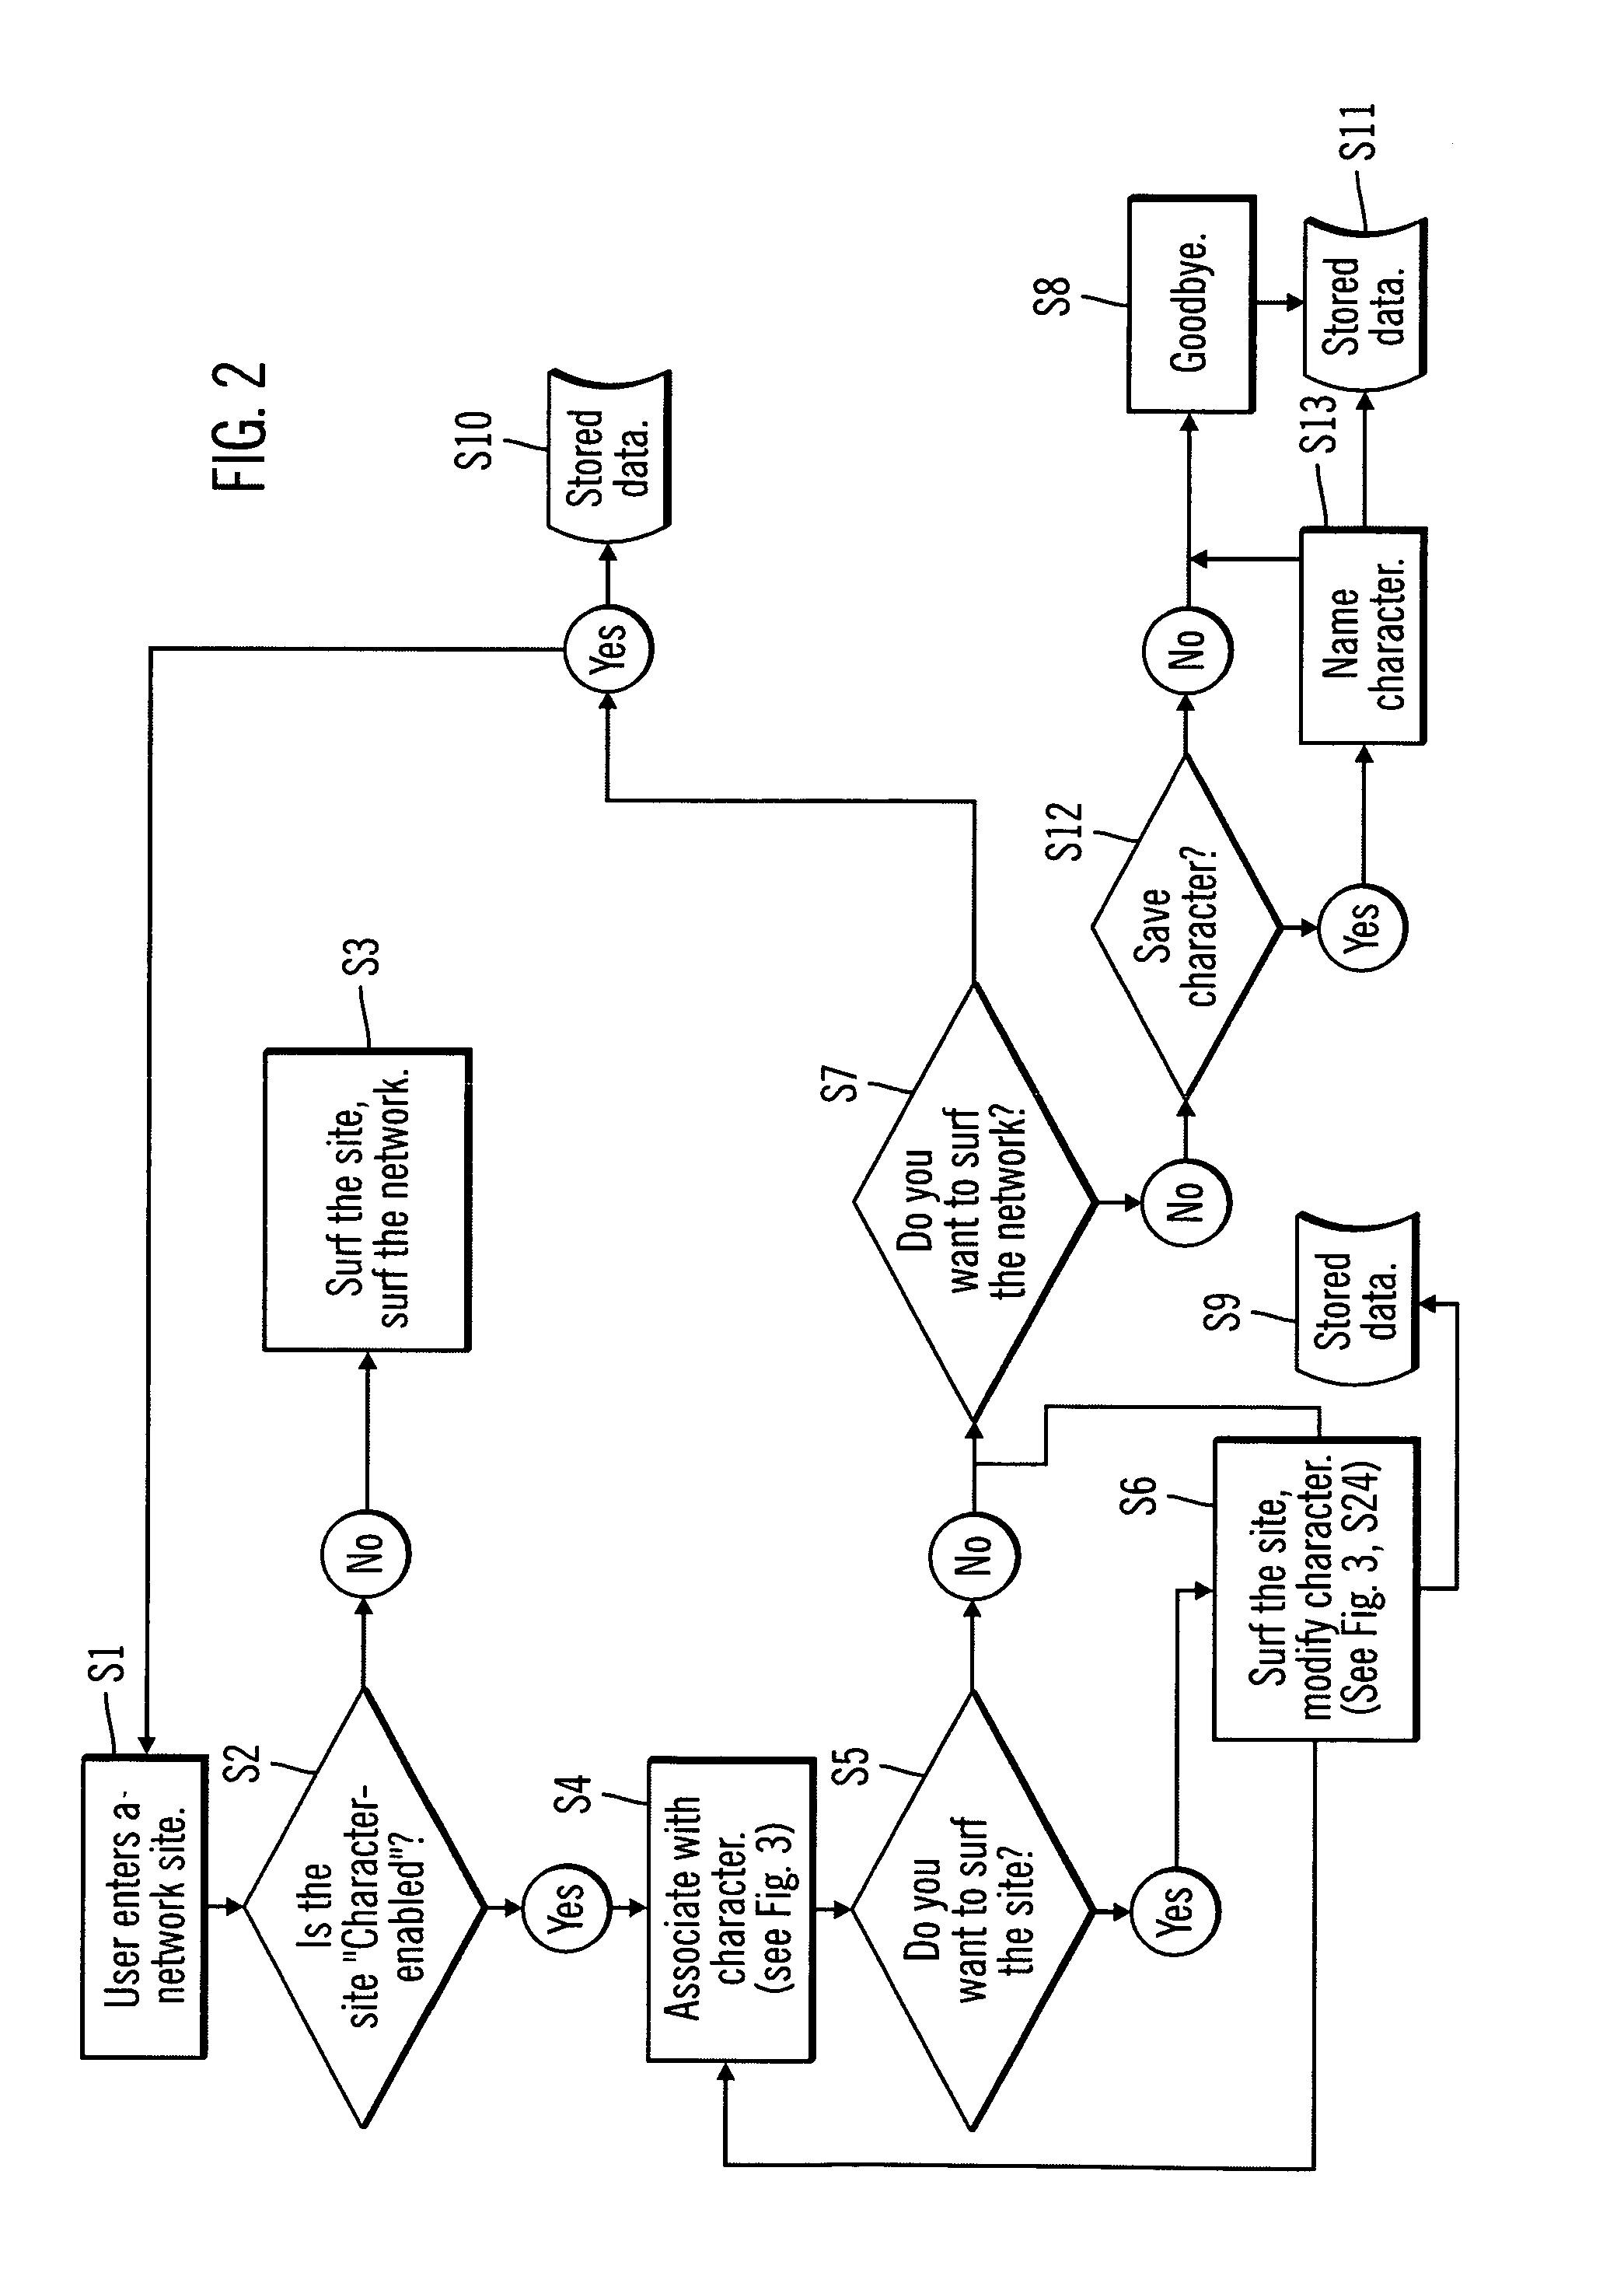 Method and system for presenting data over a network based on network user choices and collecting real-time data related to said choices